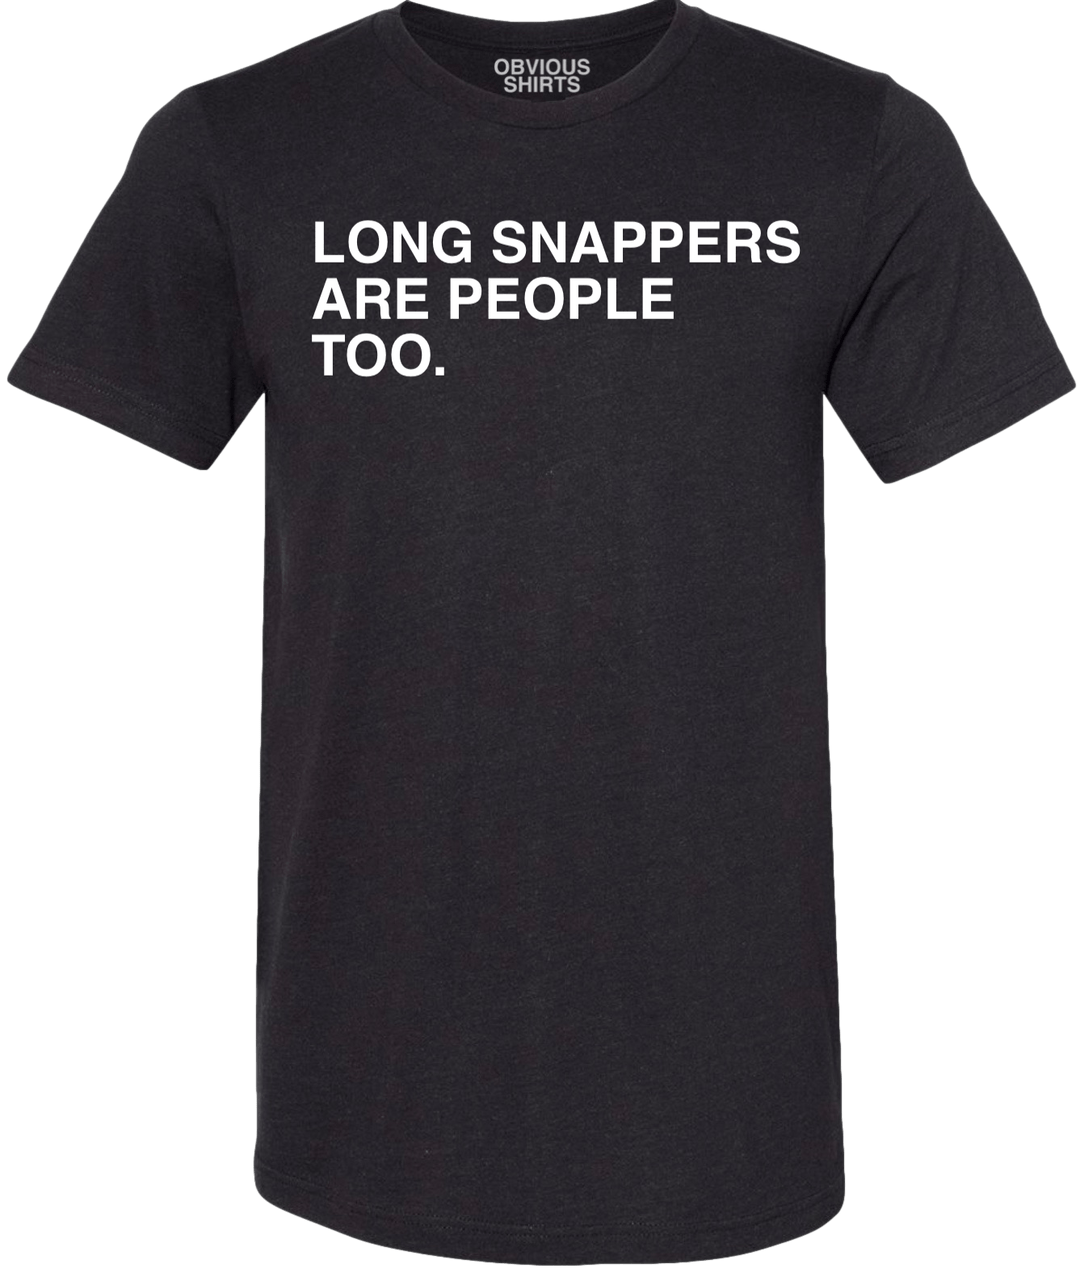 LONG SNAPPERS ARE PEOPLE TOO. (BLACK) - OBVIOUS SHIRTS